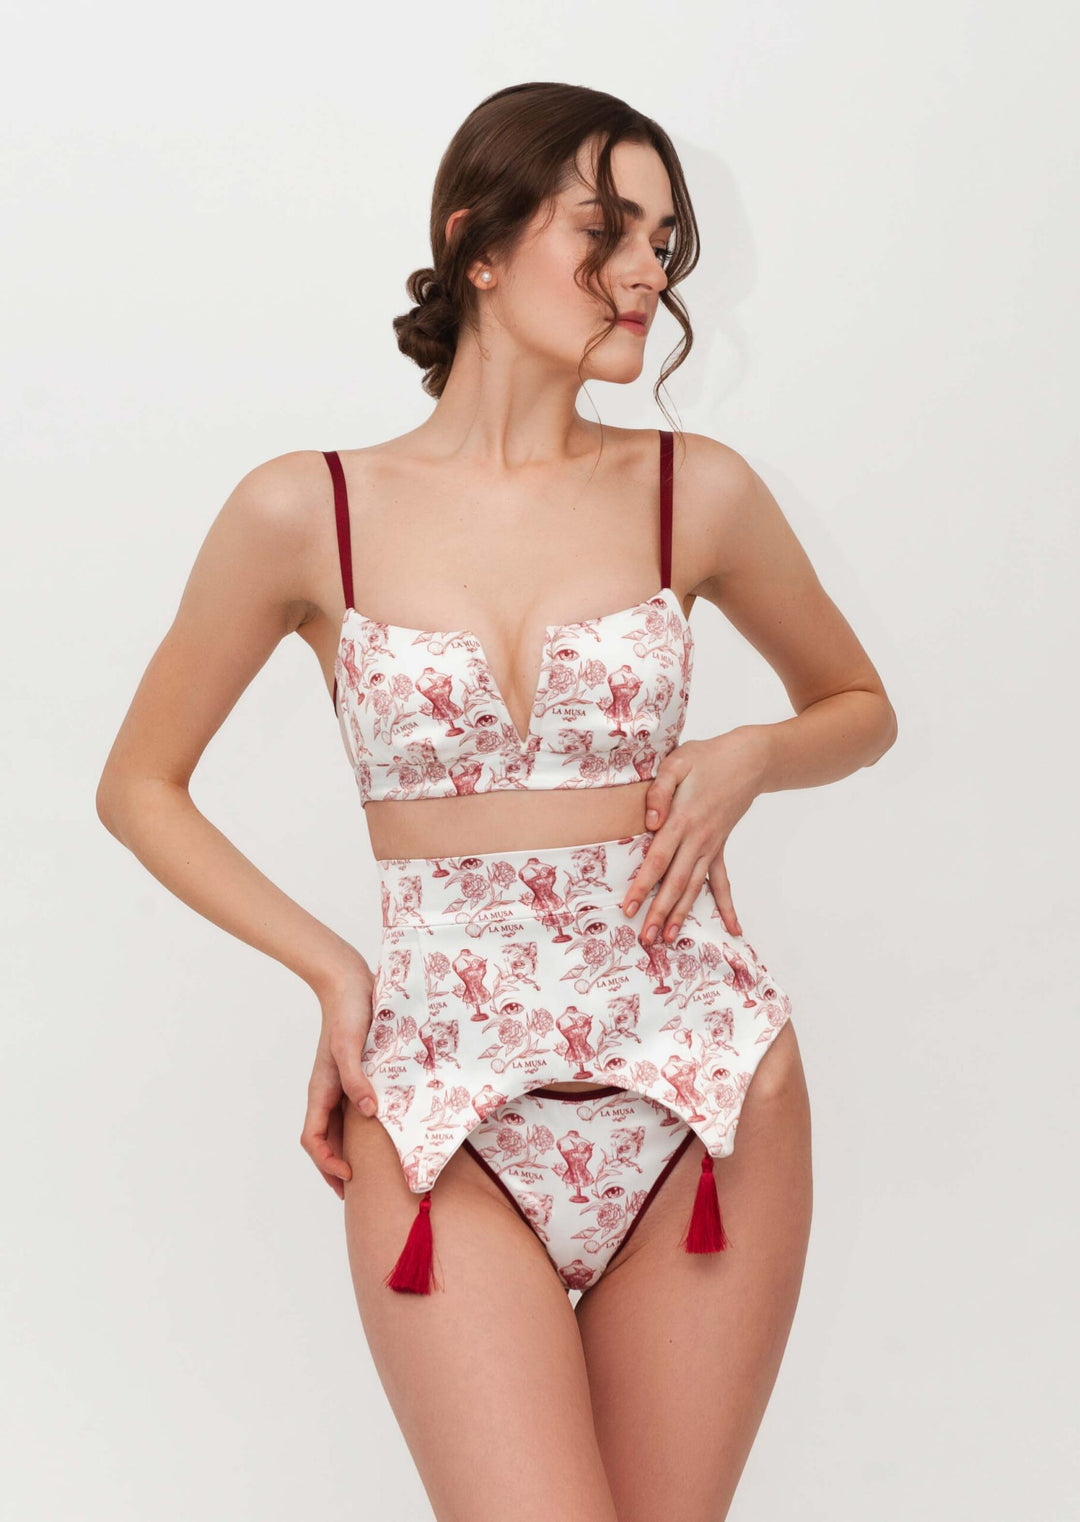 CUPID CORSET BY LA MUSA - Expect Lace